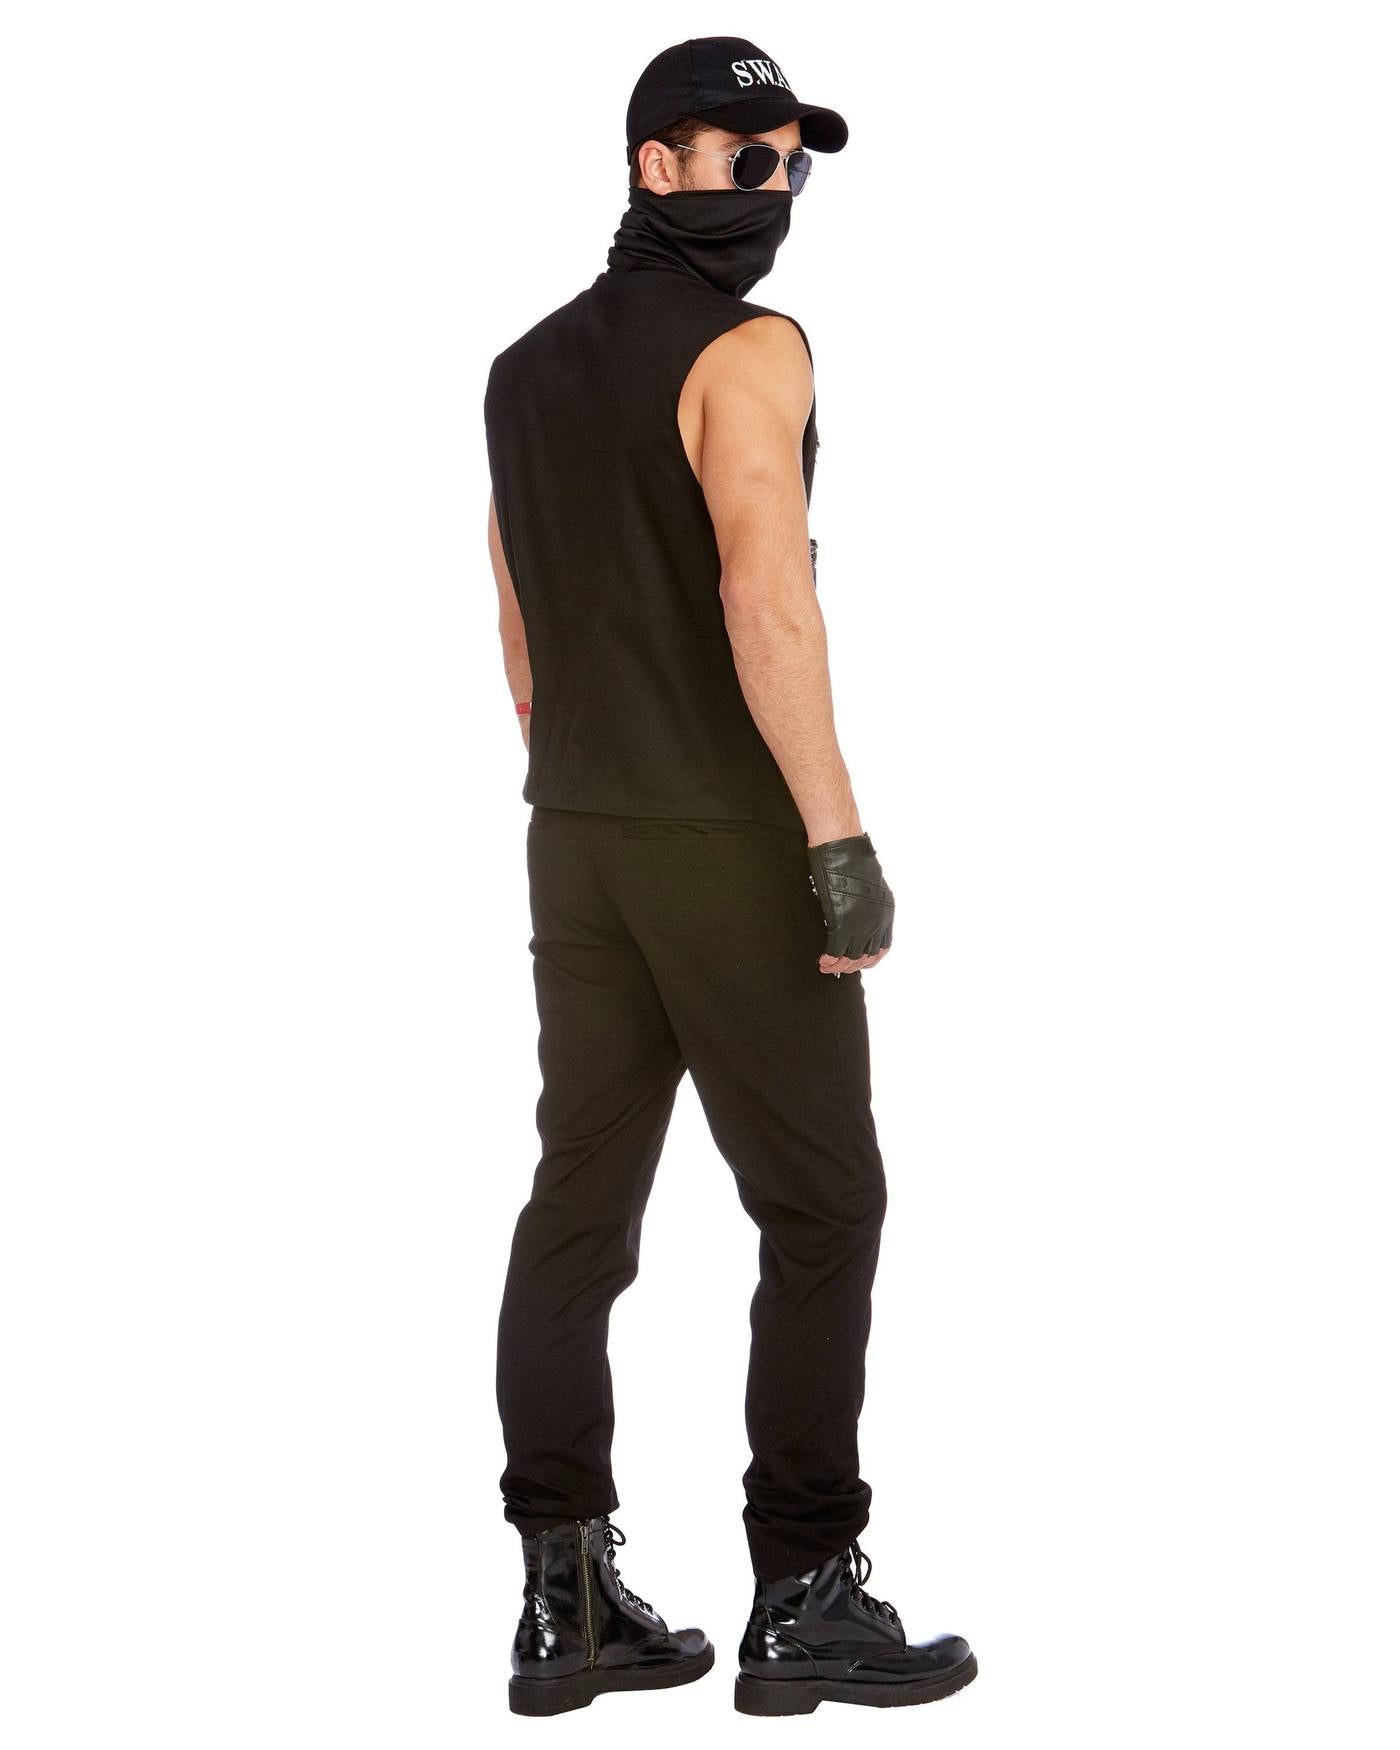 Special Ops Adult Costume